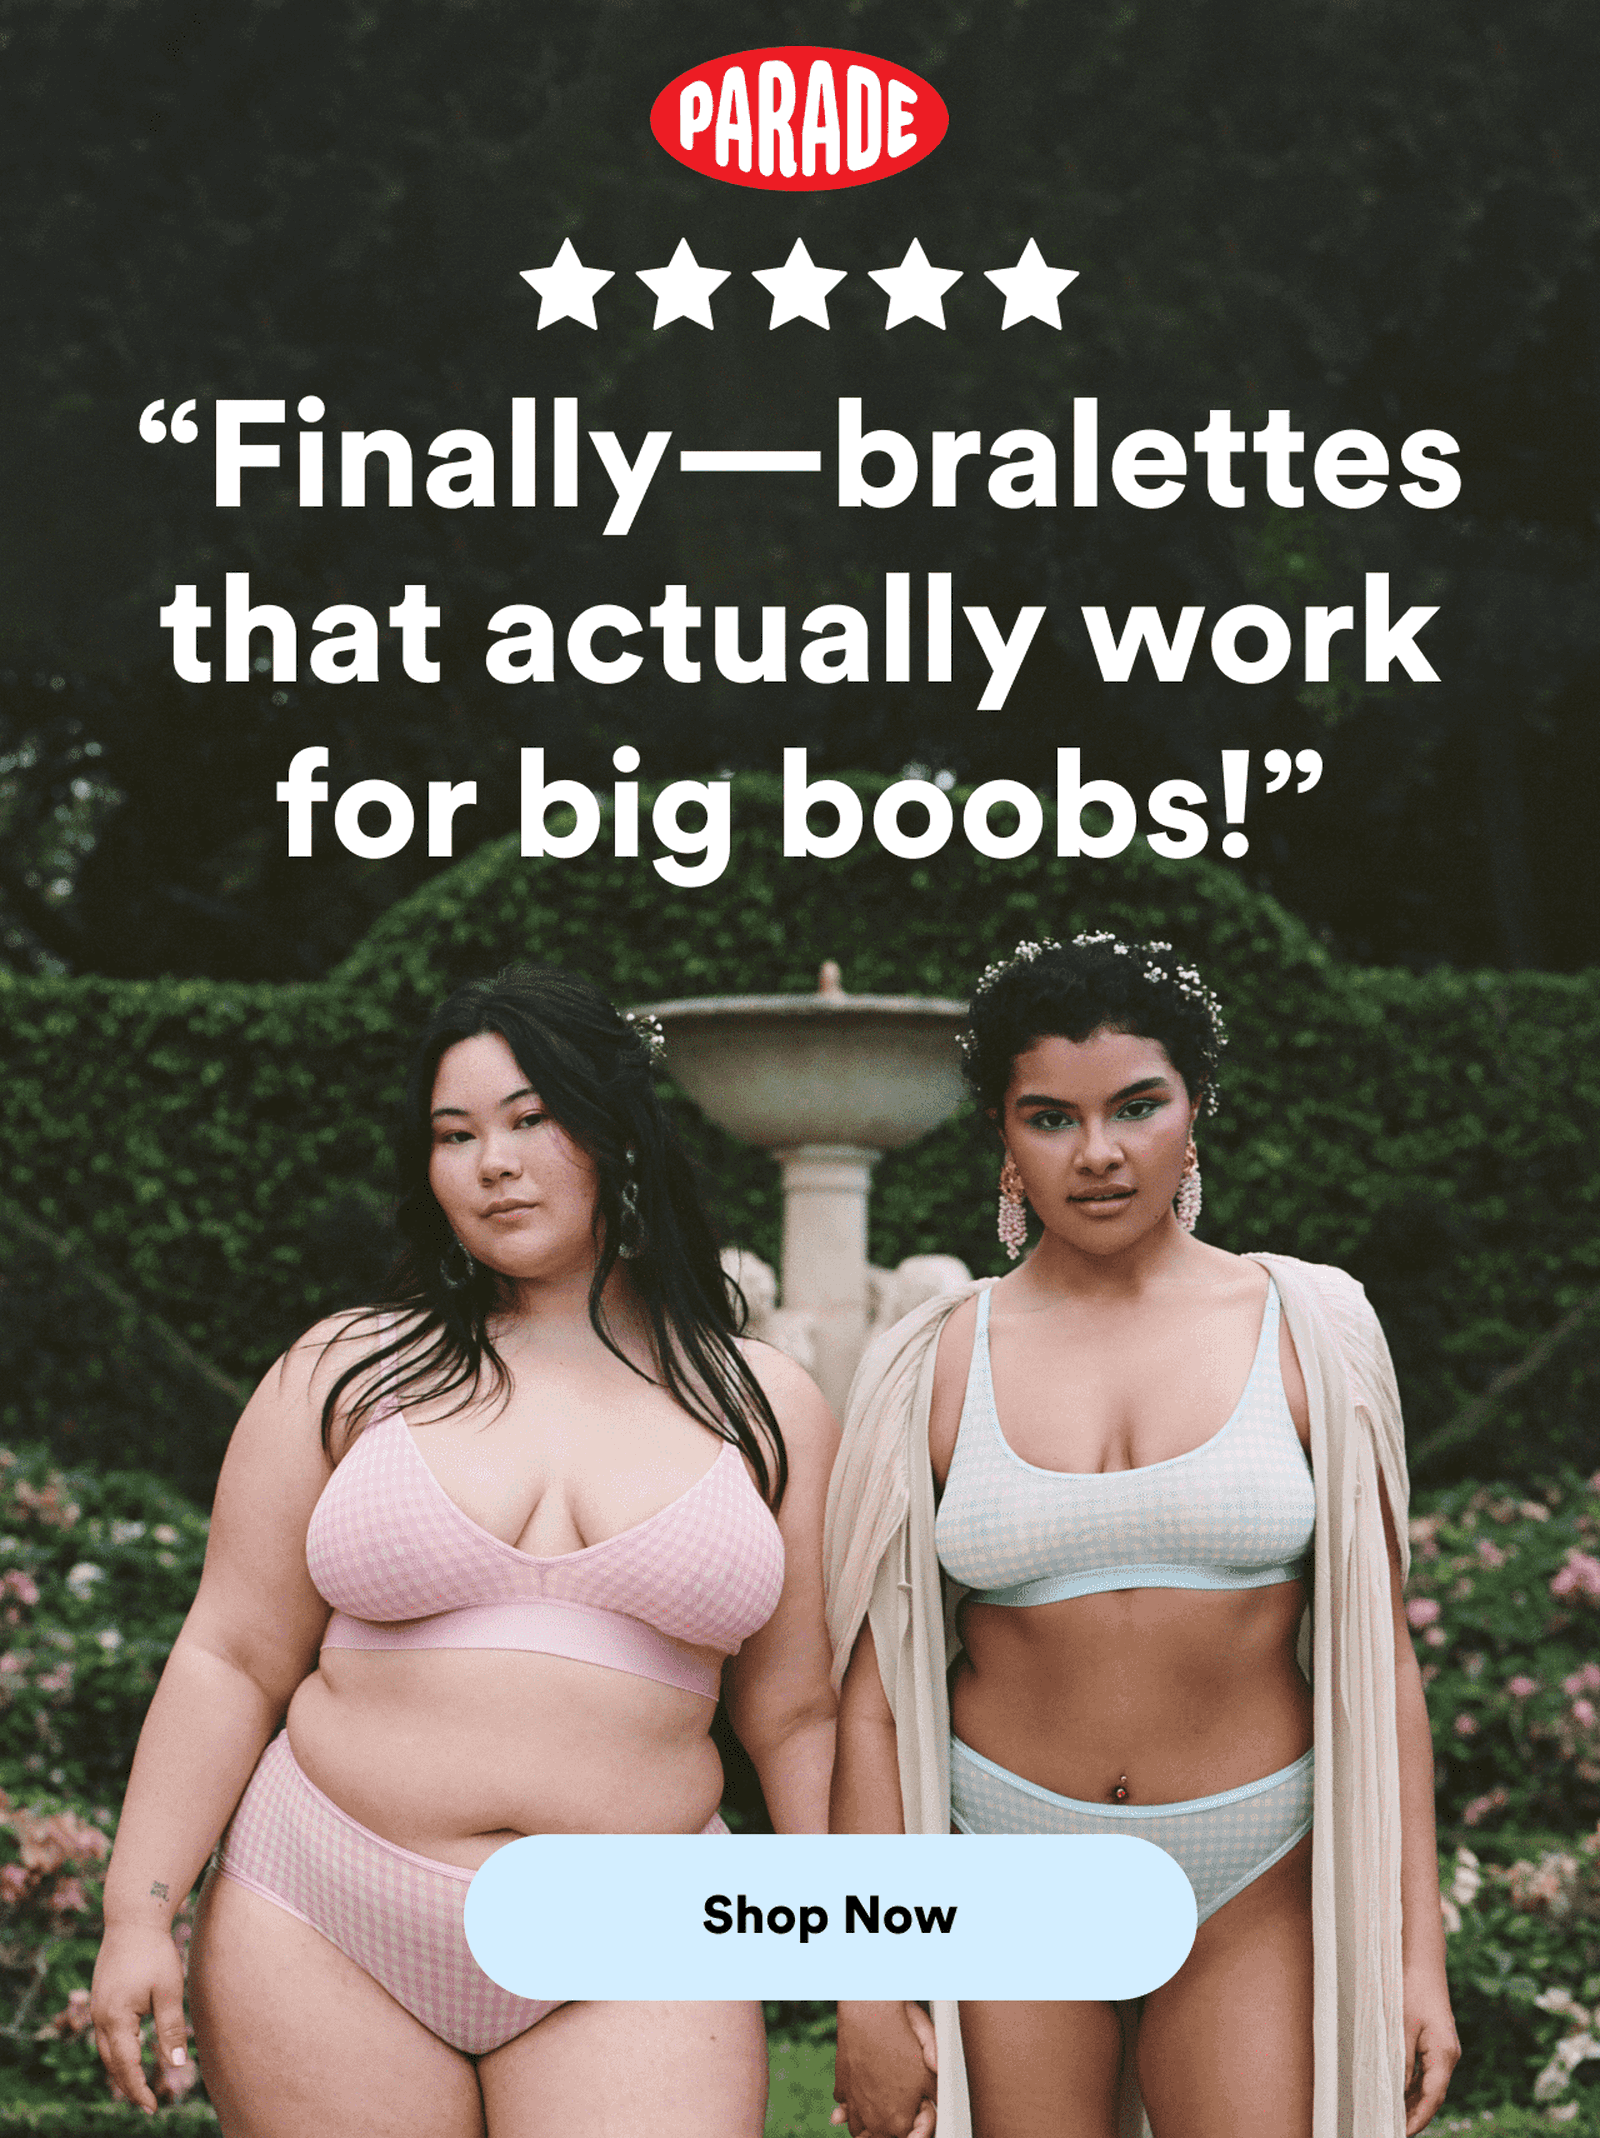 Parade: Finally- bralettes that actually work for big boobs!